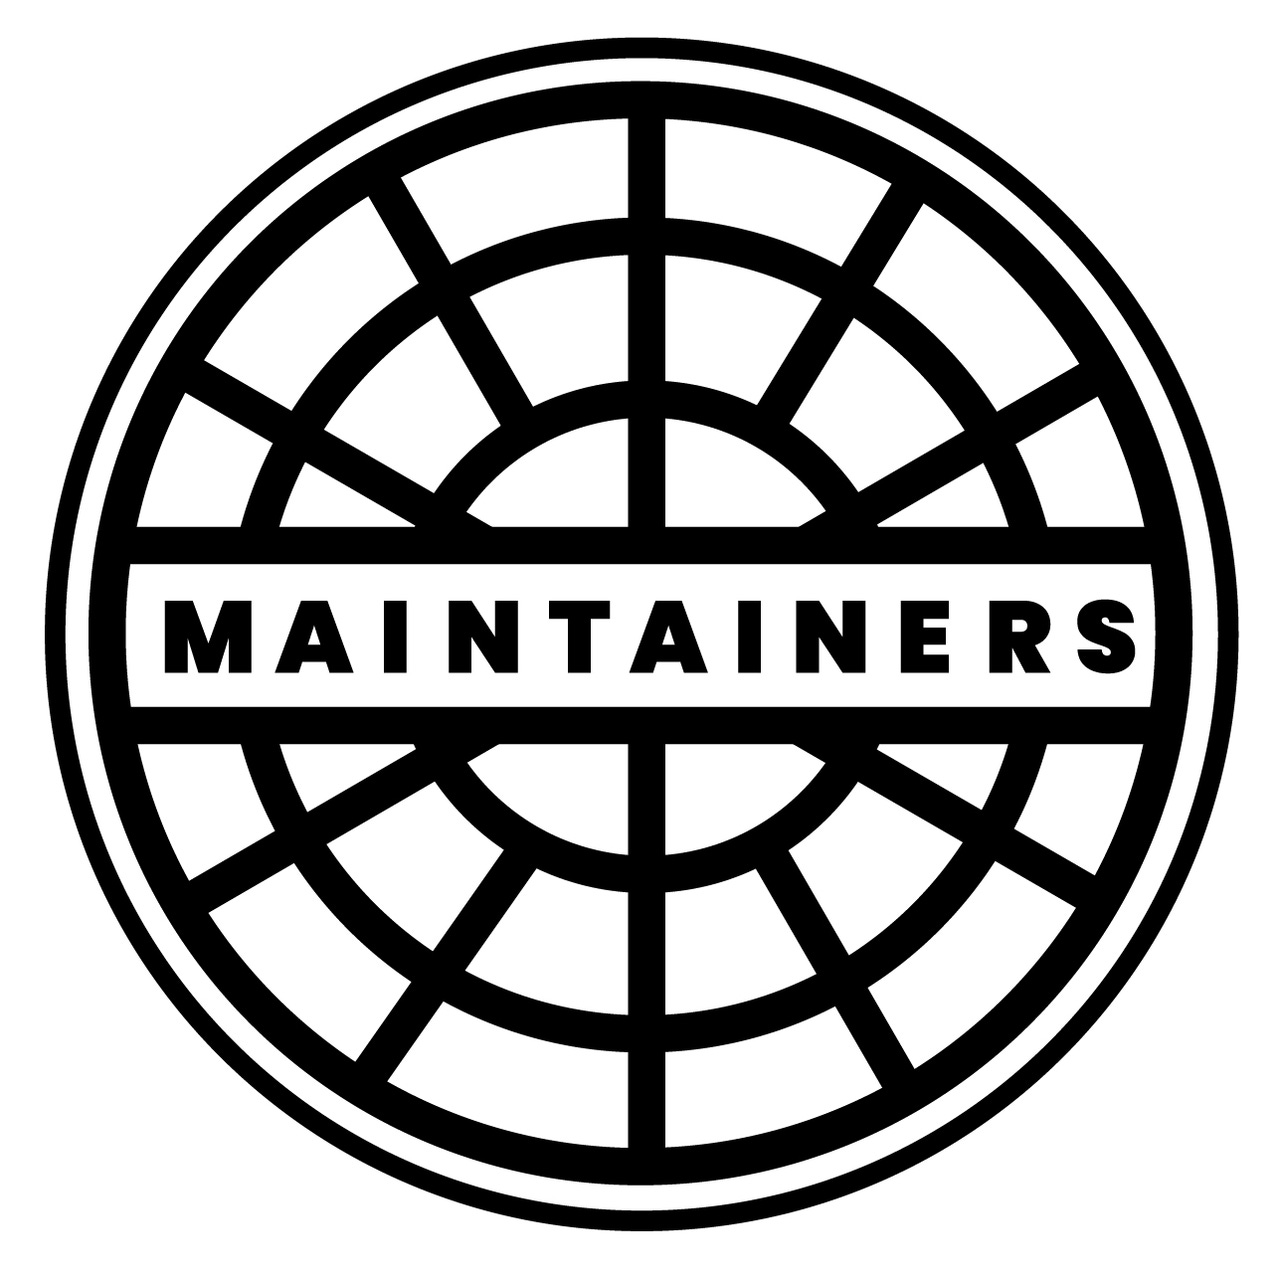 The Maintainers